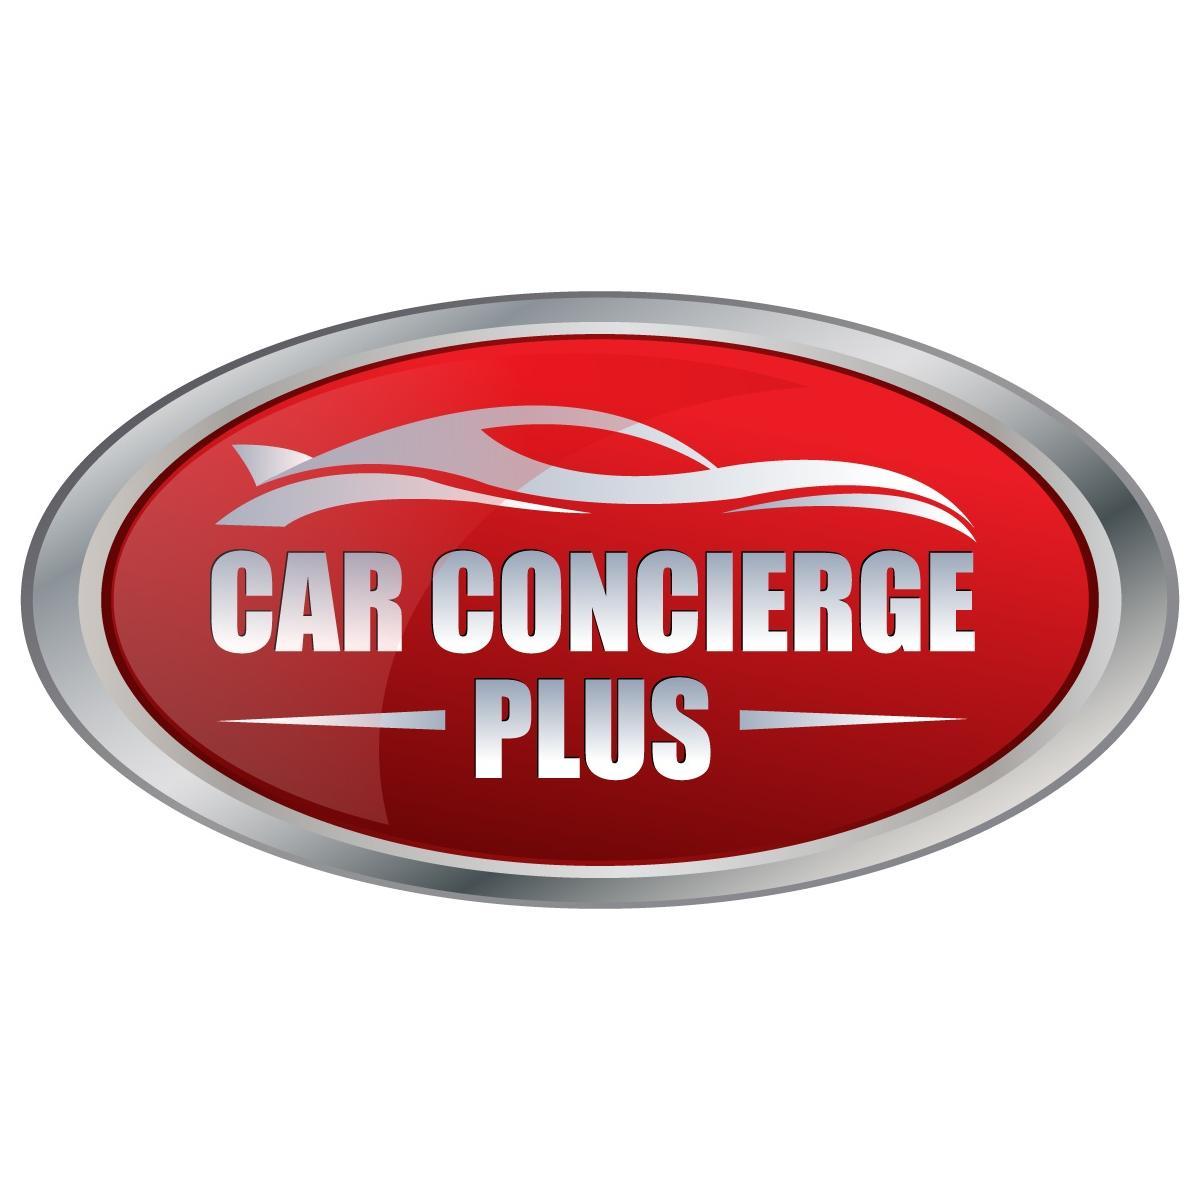 #1 Online Rated Car Negotiator in the US / 11 Years in Business / $9,500,000+ in Client Savings!